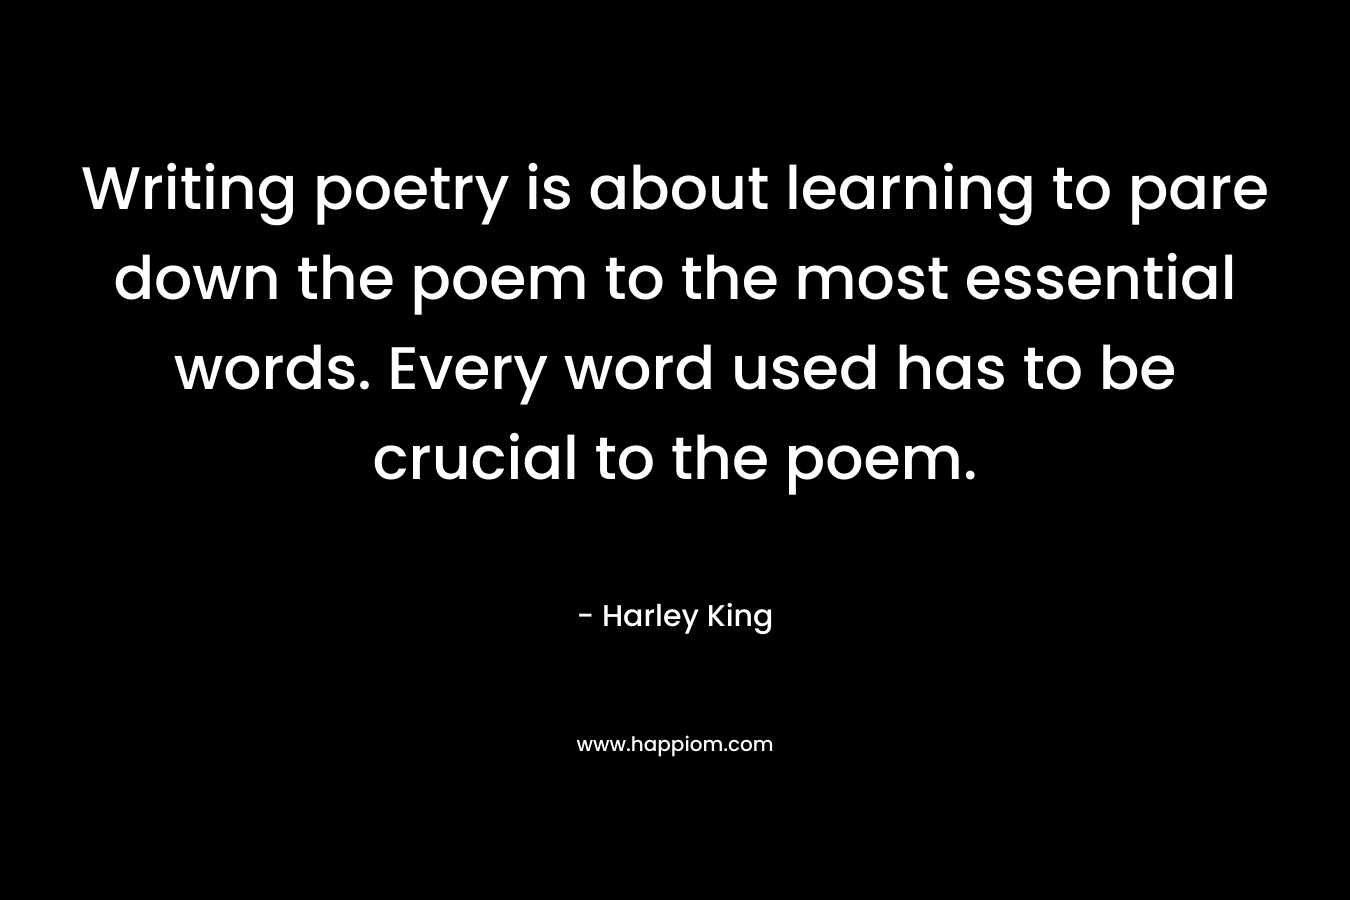 Writing poetry is about learning to pare down the poem to the most essential words. Every word used has to be crucial to the poem.